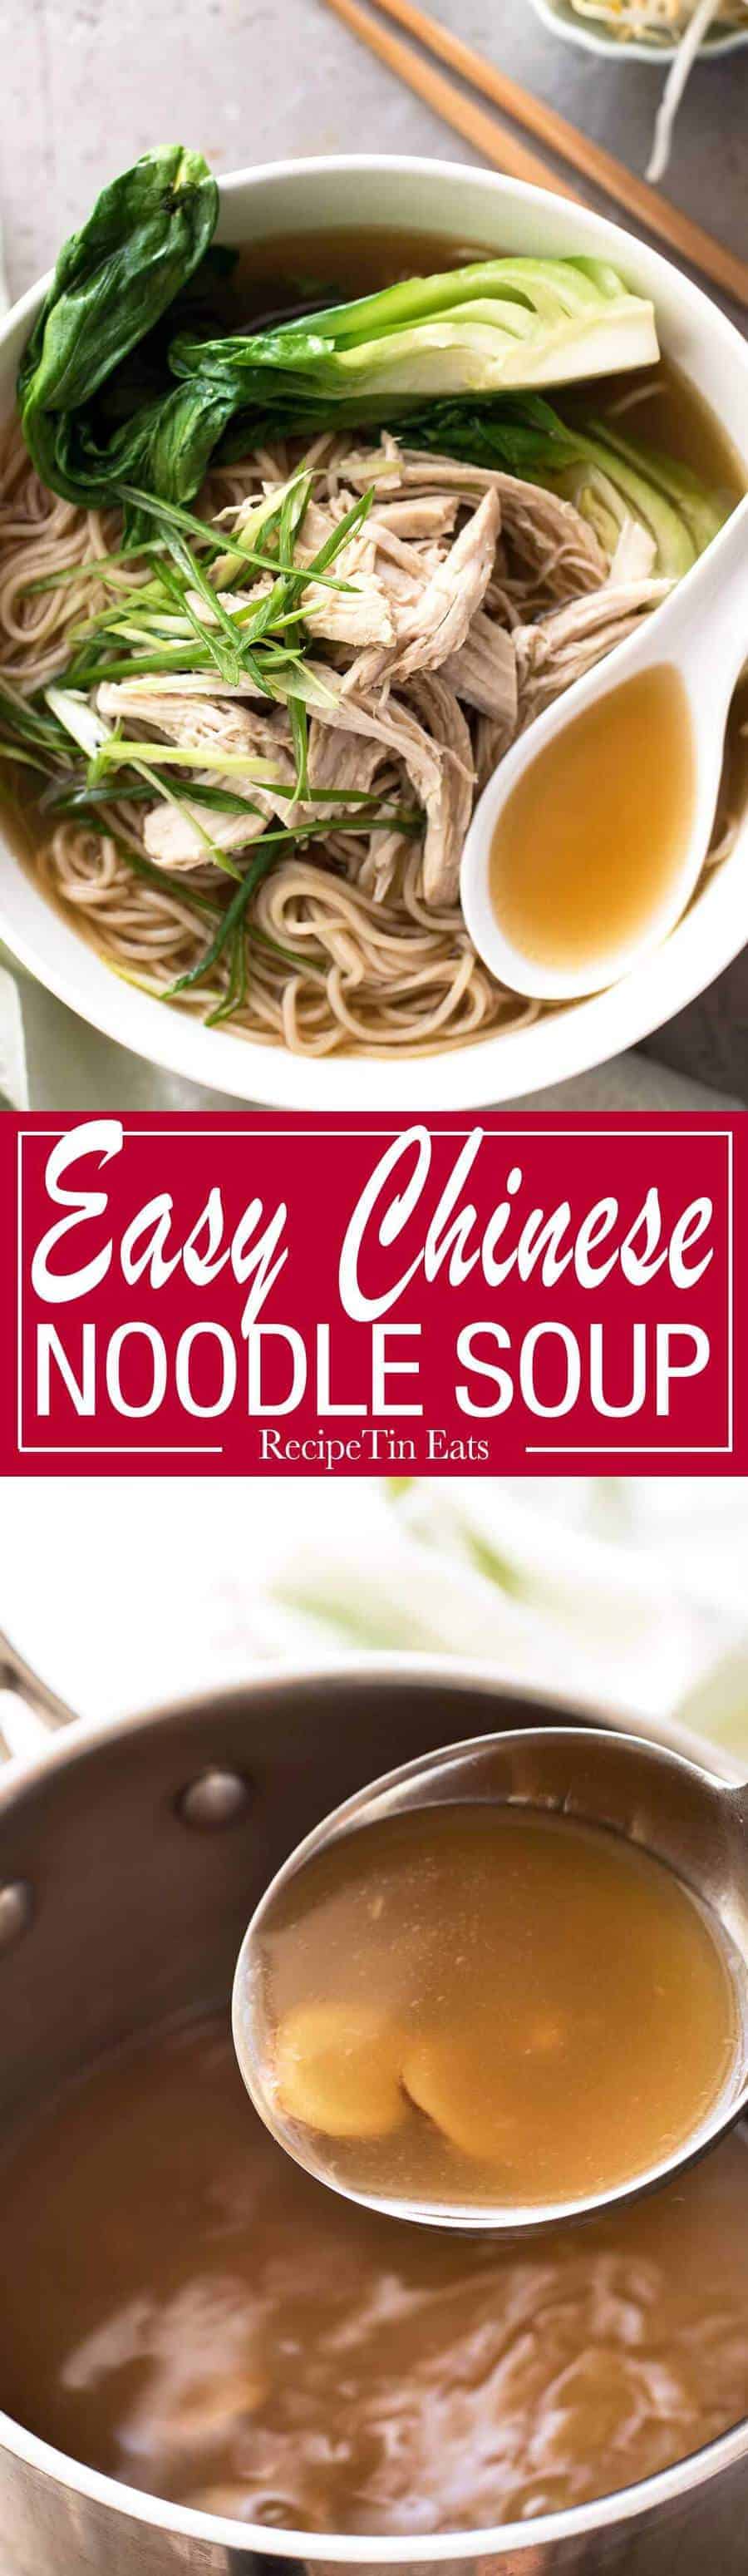 A fast and easy PROPER Chinese soup broth is the key to a noodle soup that tastes as good as what you get at restaurants. Just 20 minutes to make!